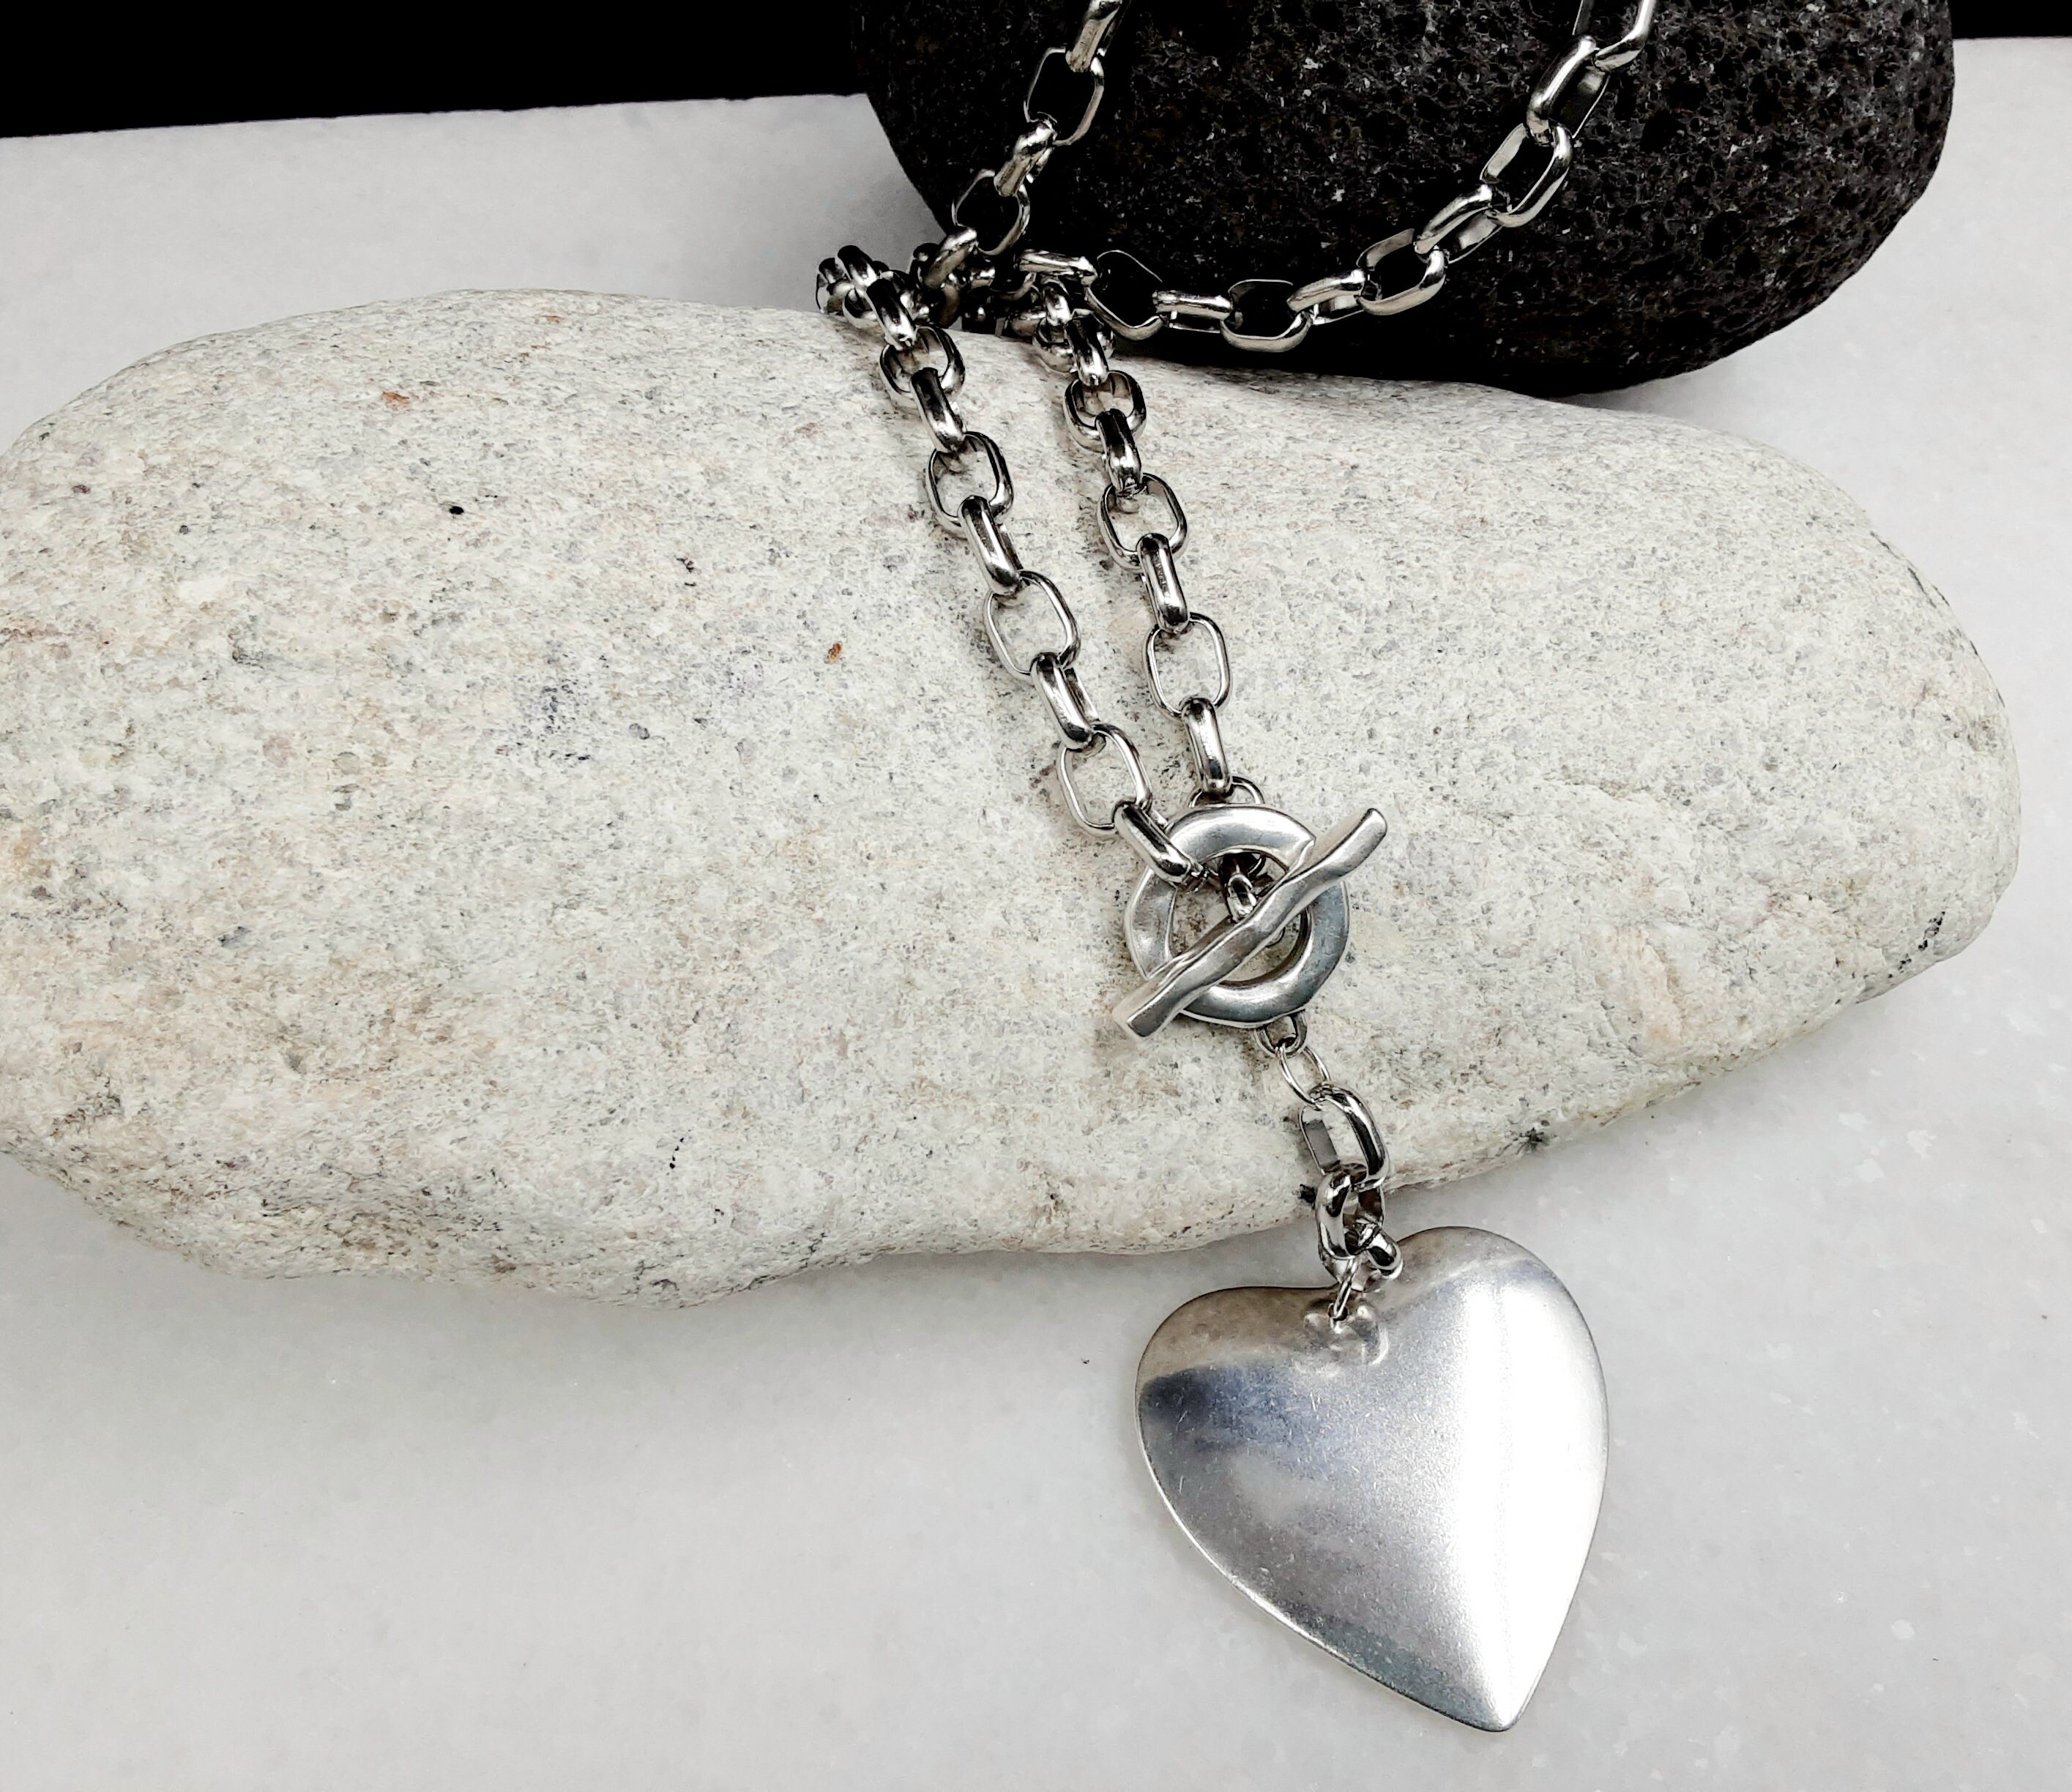 Long Silver Oversized Heart Necklace, Oval Bold Stainless Steel Chain Love Pendant, Statement Chunky Link Chain Choker, Christmas Gift